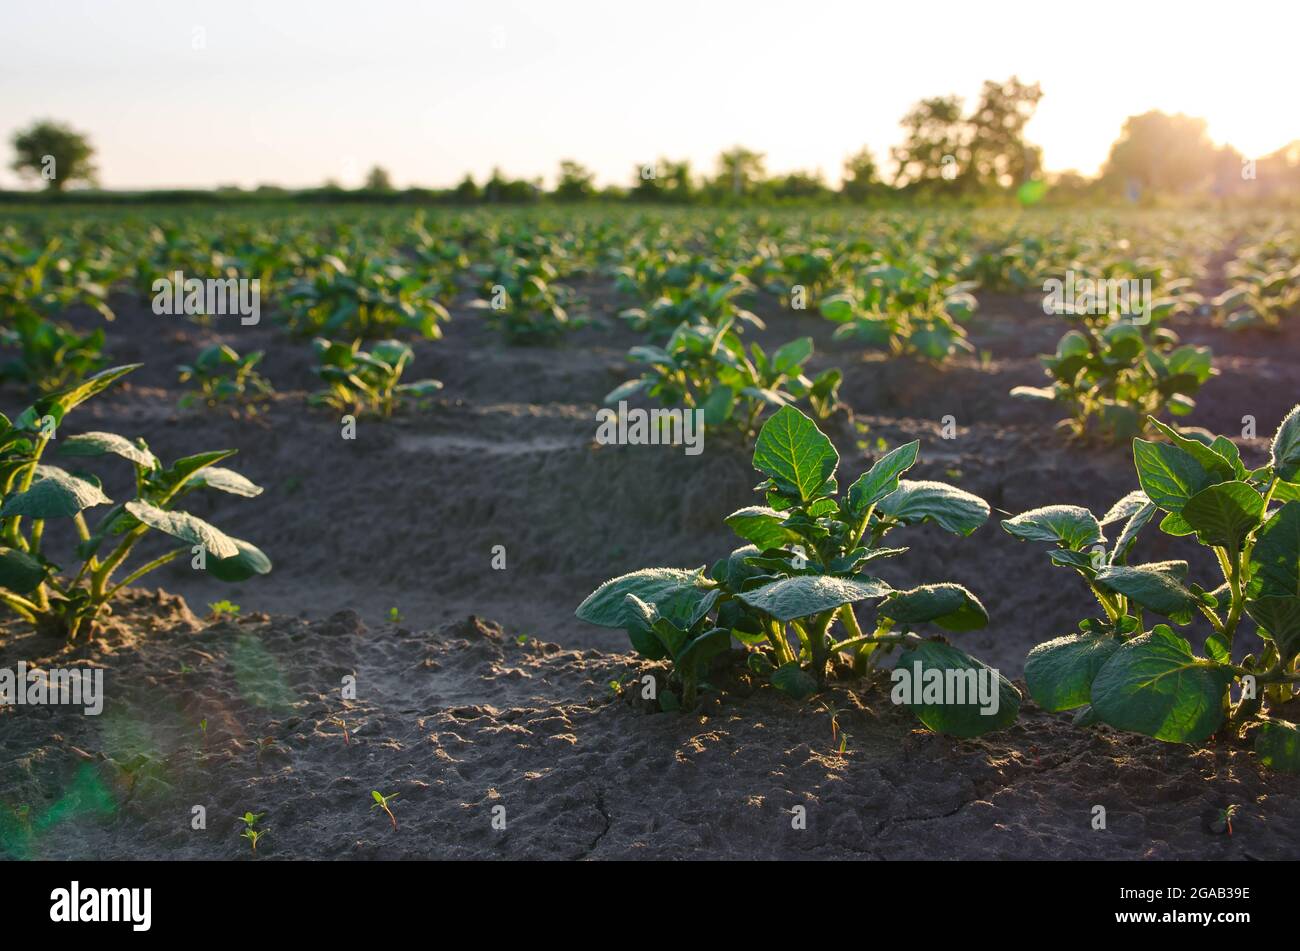 Rows of small potato bushes on a farm plantation. Vegetable rows. Growing food for sale. Olericulture. Agriculture and agro industry. Landscape with a Stock Photo